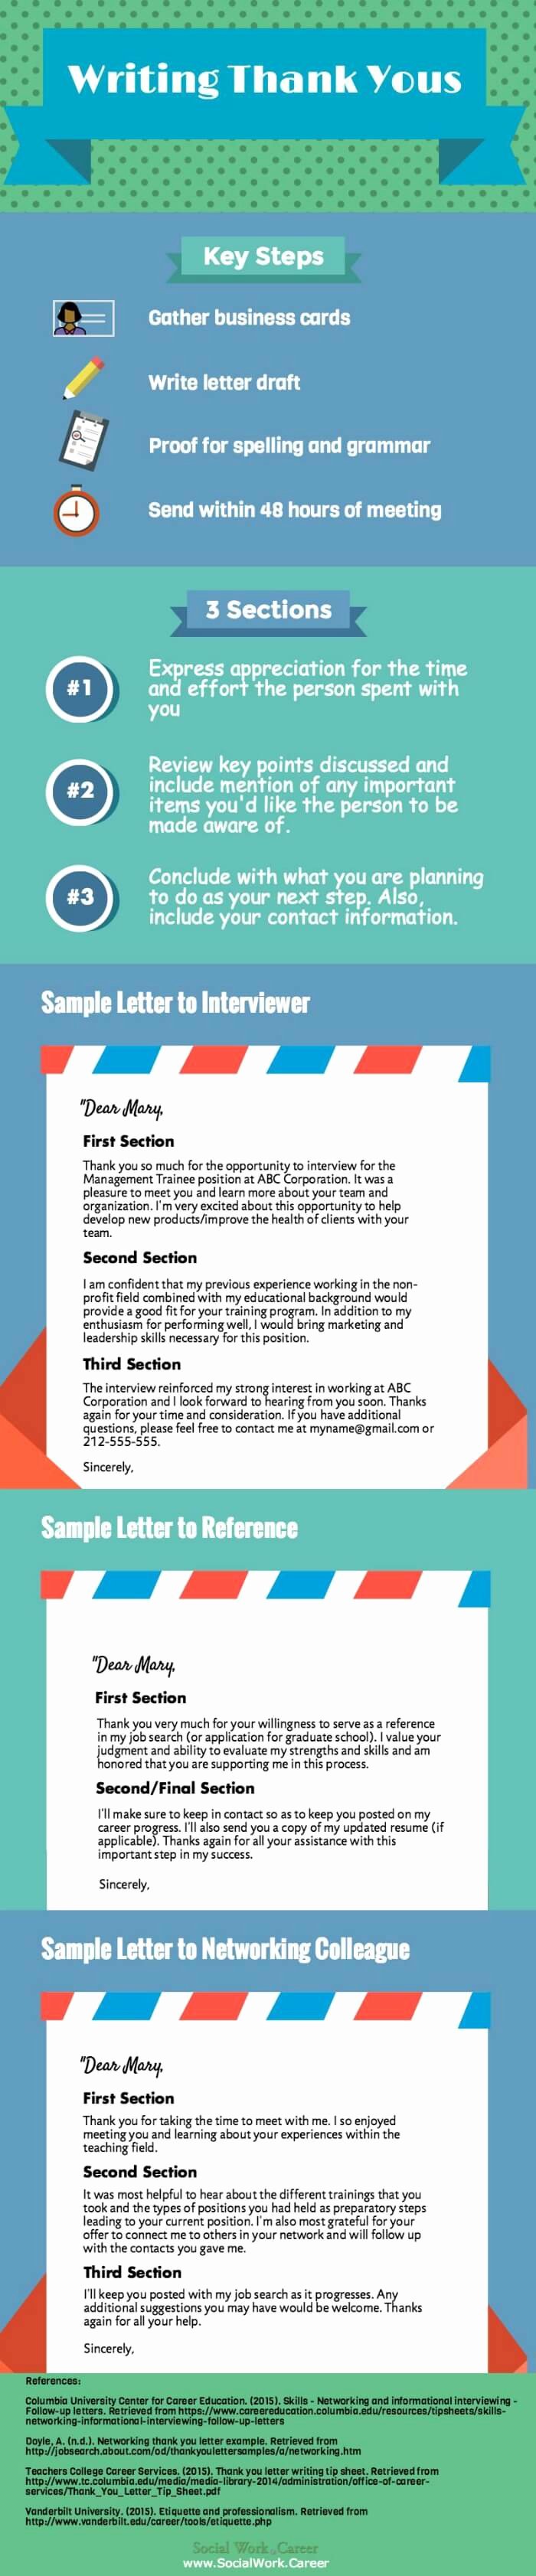 Write A Thank You Letter Inspirational Thank You Letters How and why to Write them socialwork